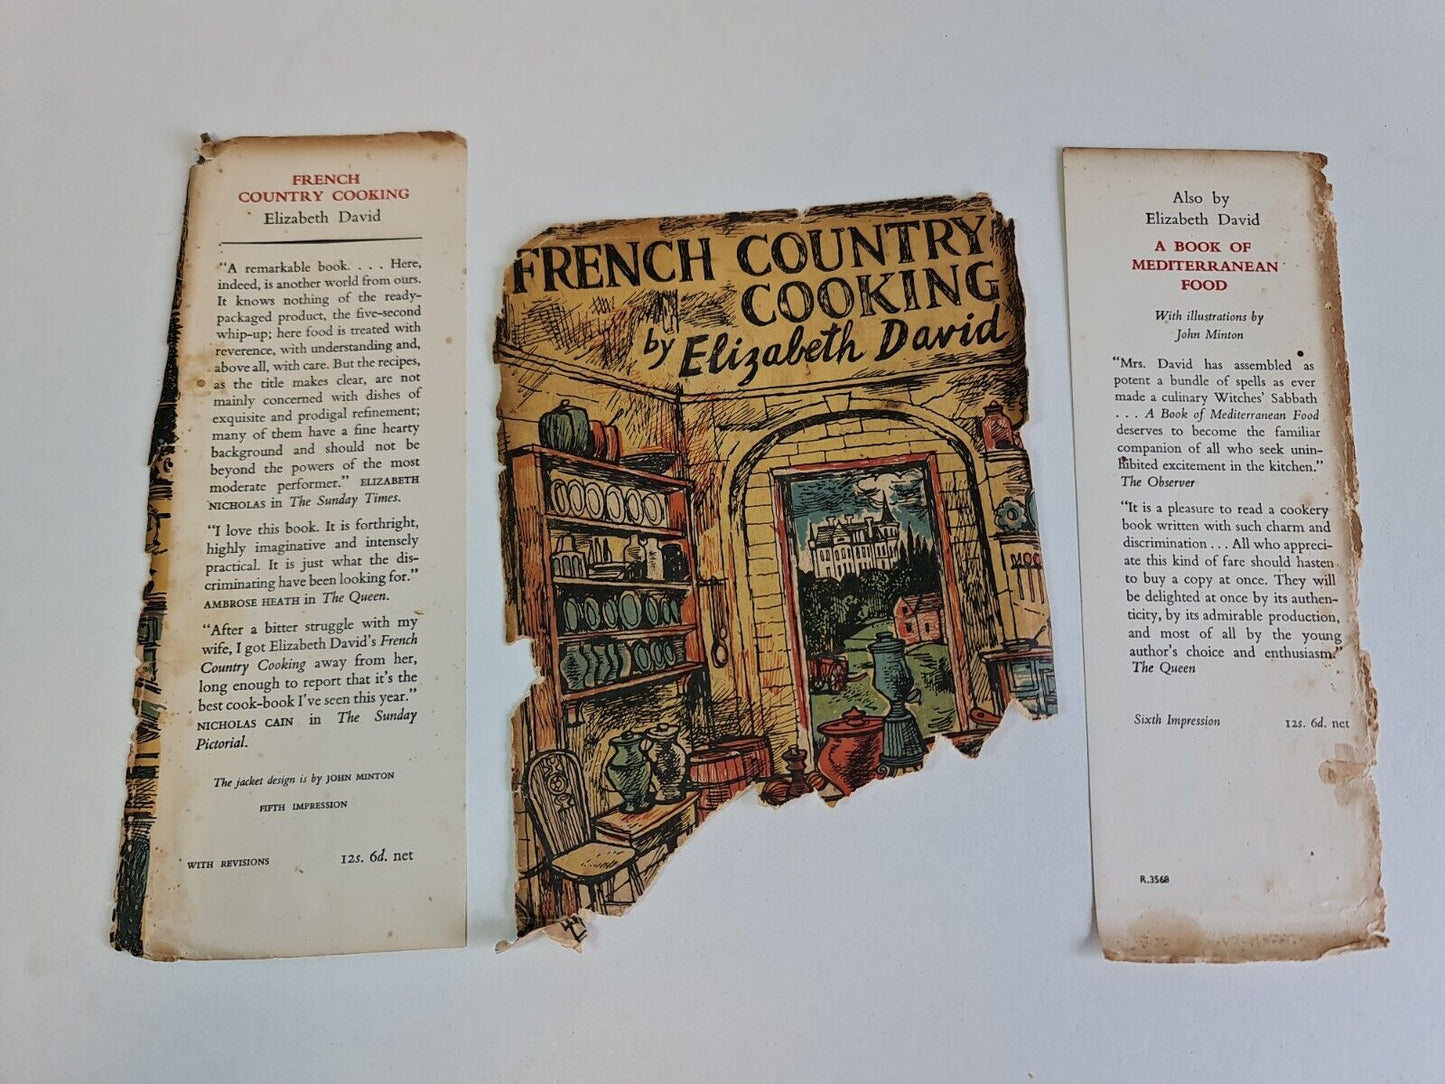 French Country Cooking by Elizabeth David (1954)